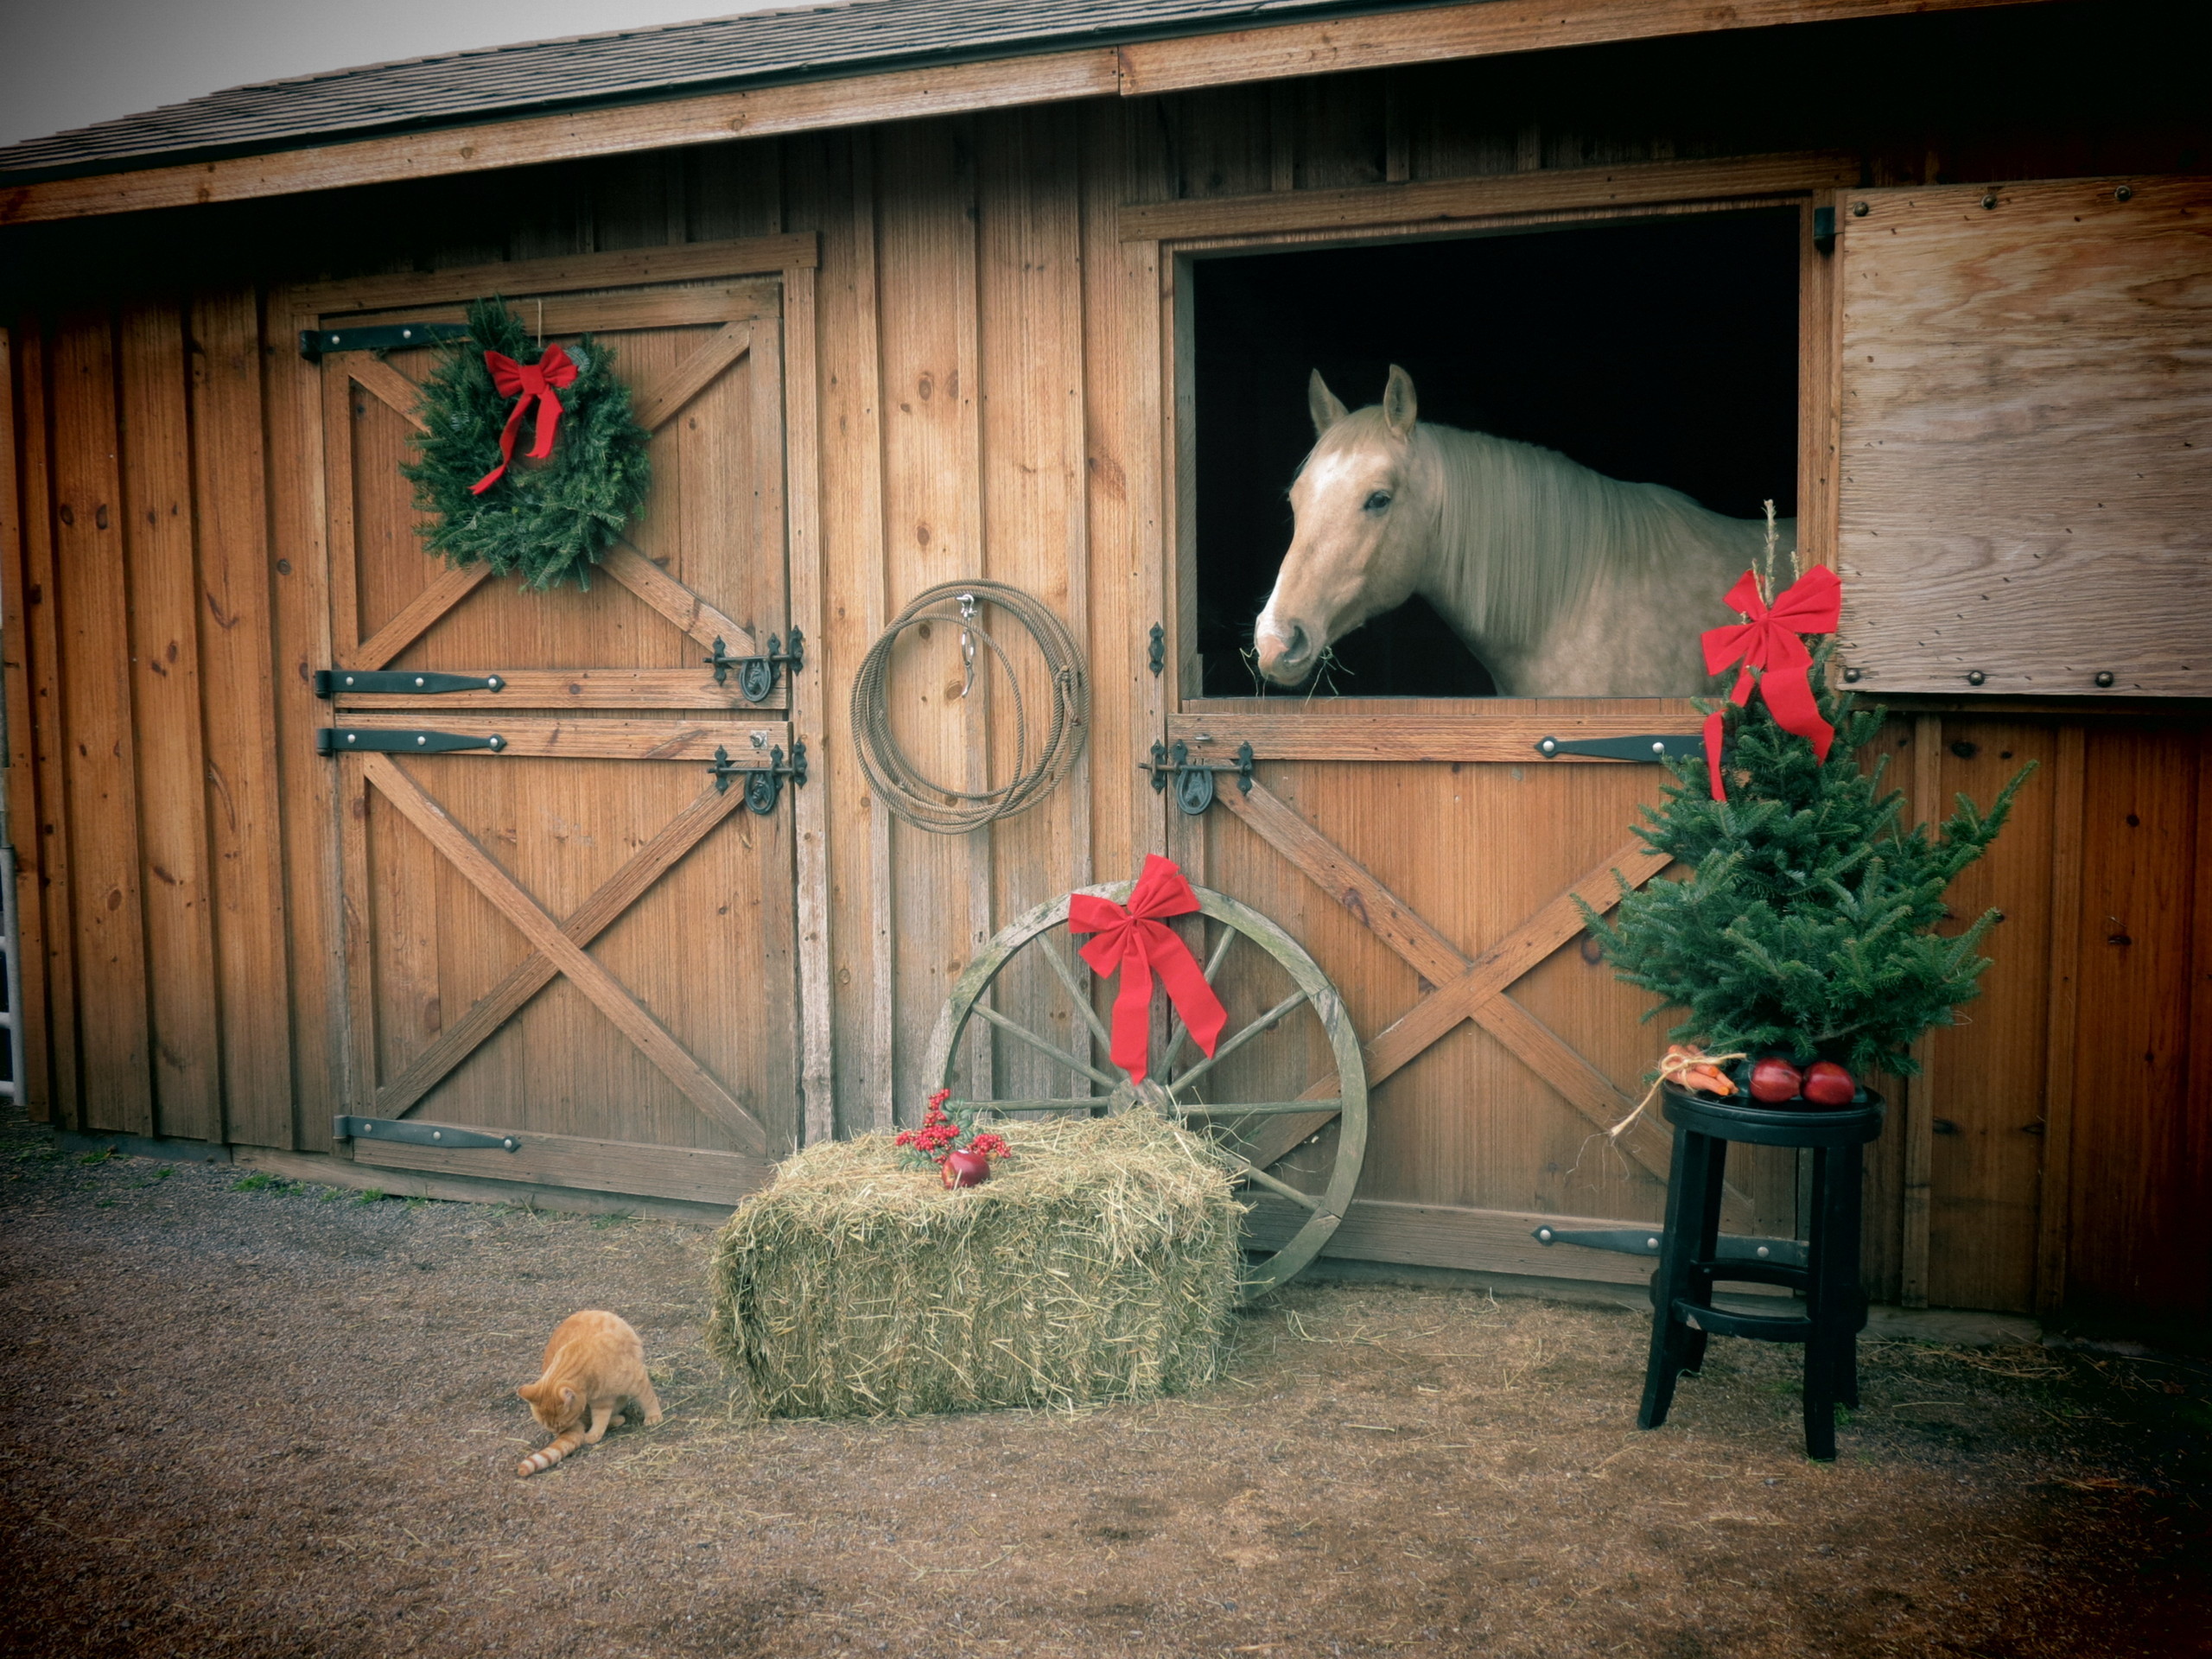 2560x1920 Horses images Country Christmas HD wallpaper and background photos